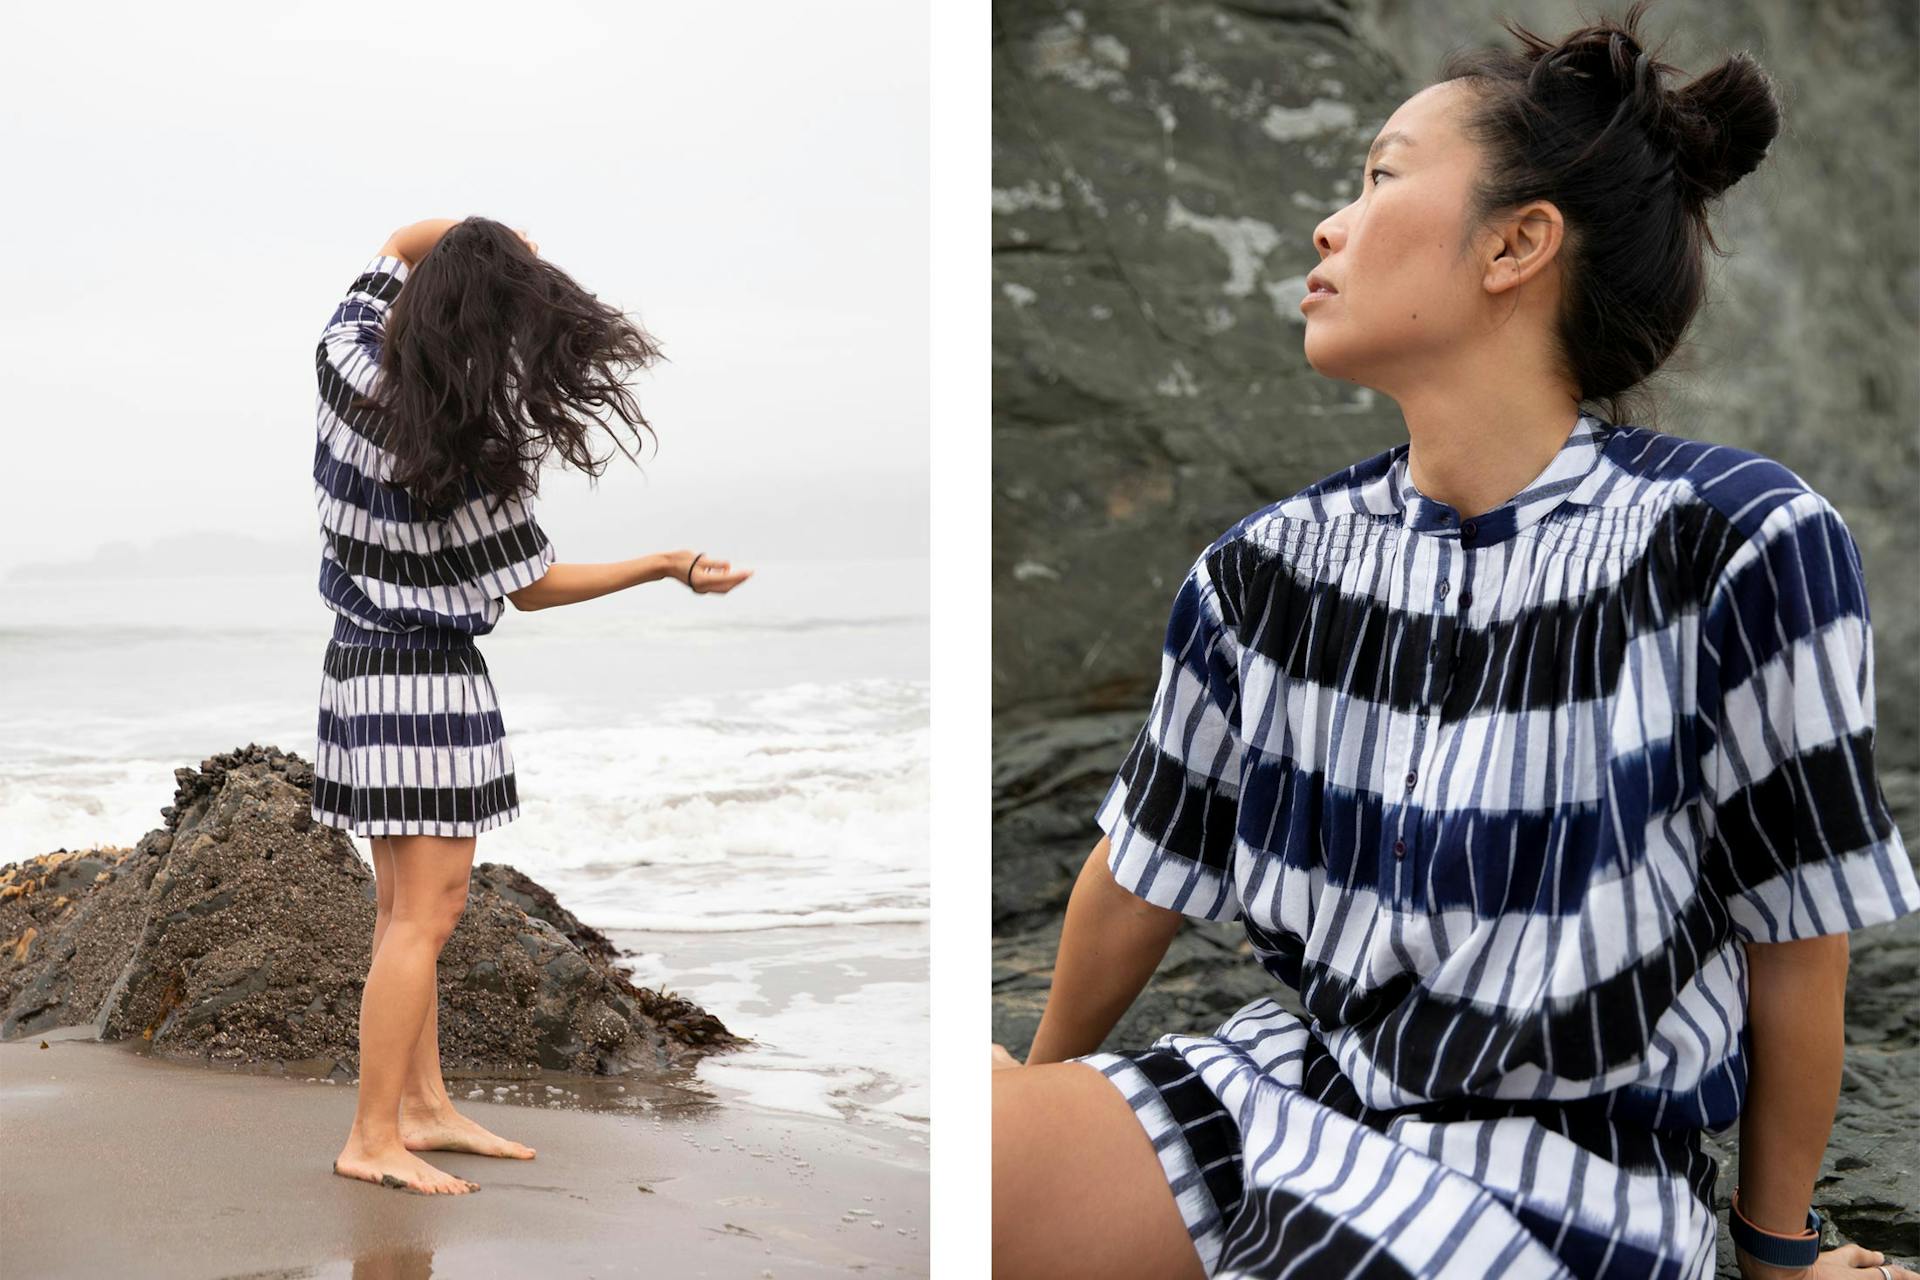 Two images. The first shows Bonnie Tsui wearing a striped dress standing on the beach. The second shows Bonnie Tsui sitting down and wearing a striped dress